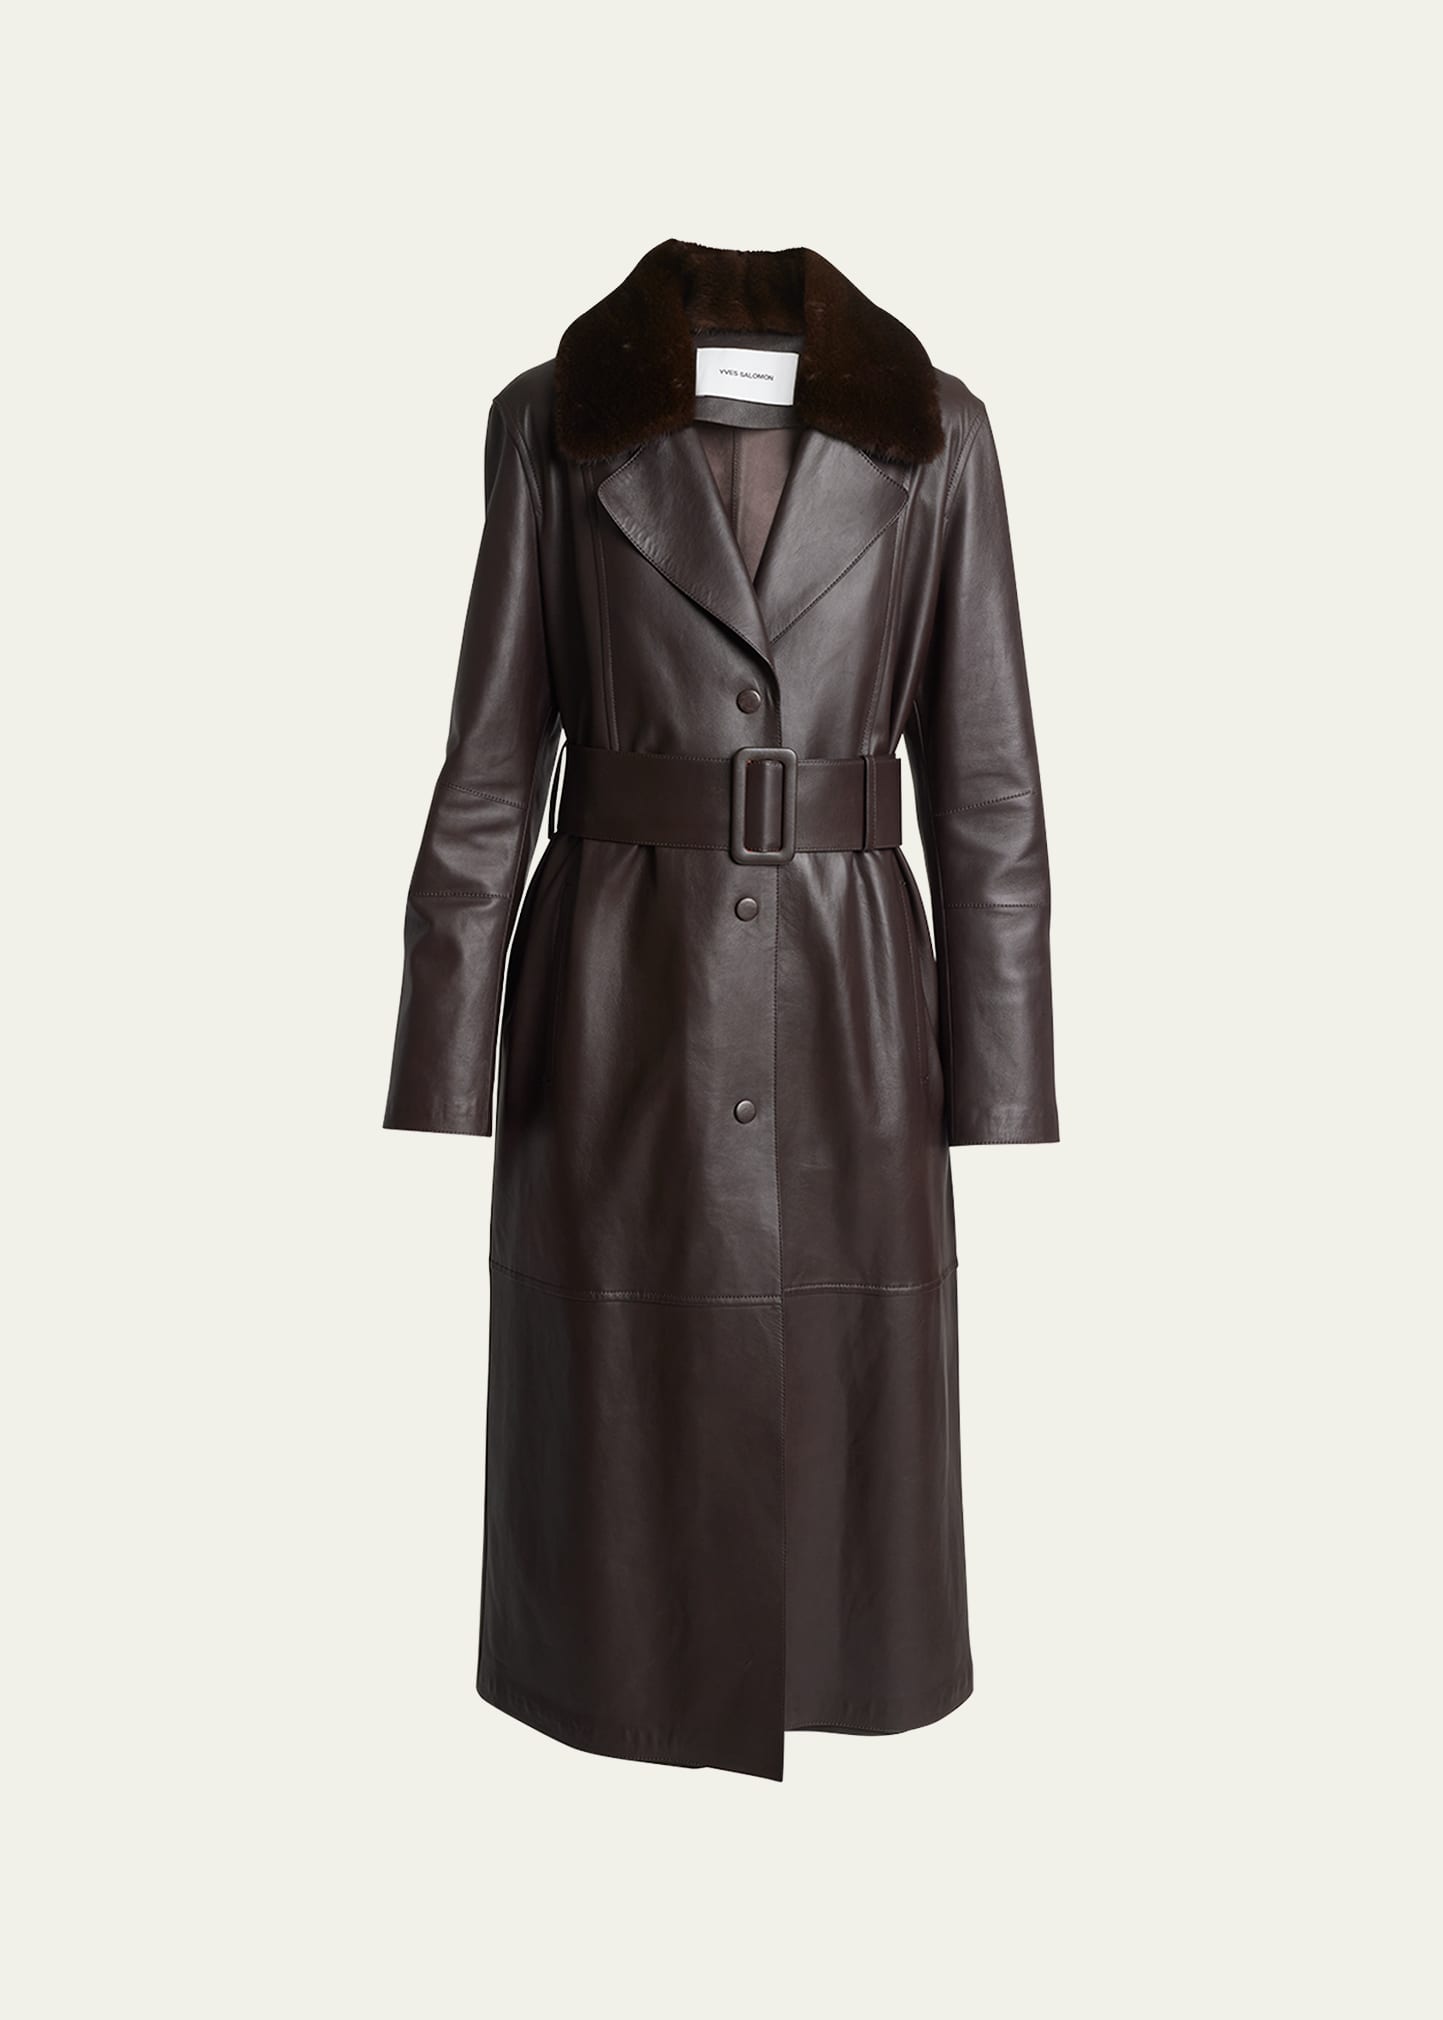 YVES SALOMON BELTED LEATHER TRENCH COAT WITH SHEARLING COLLAR